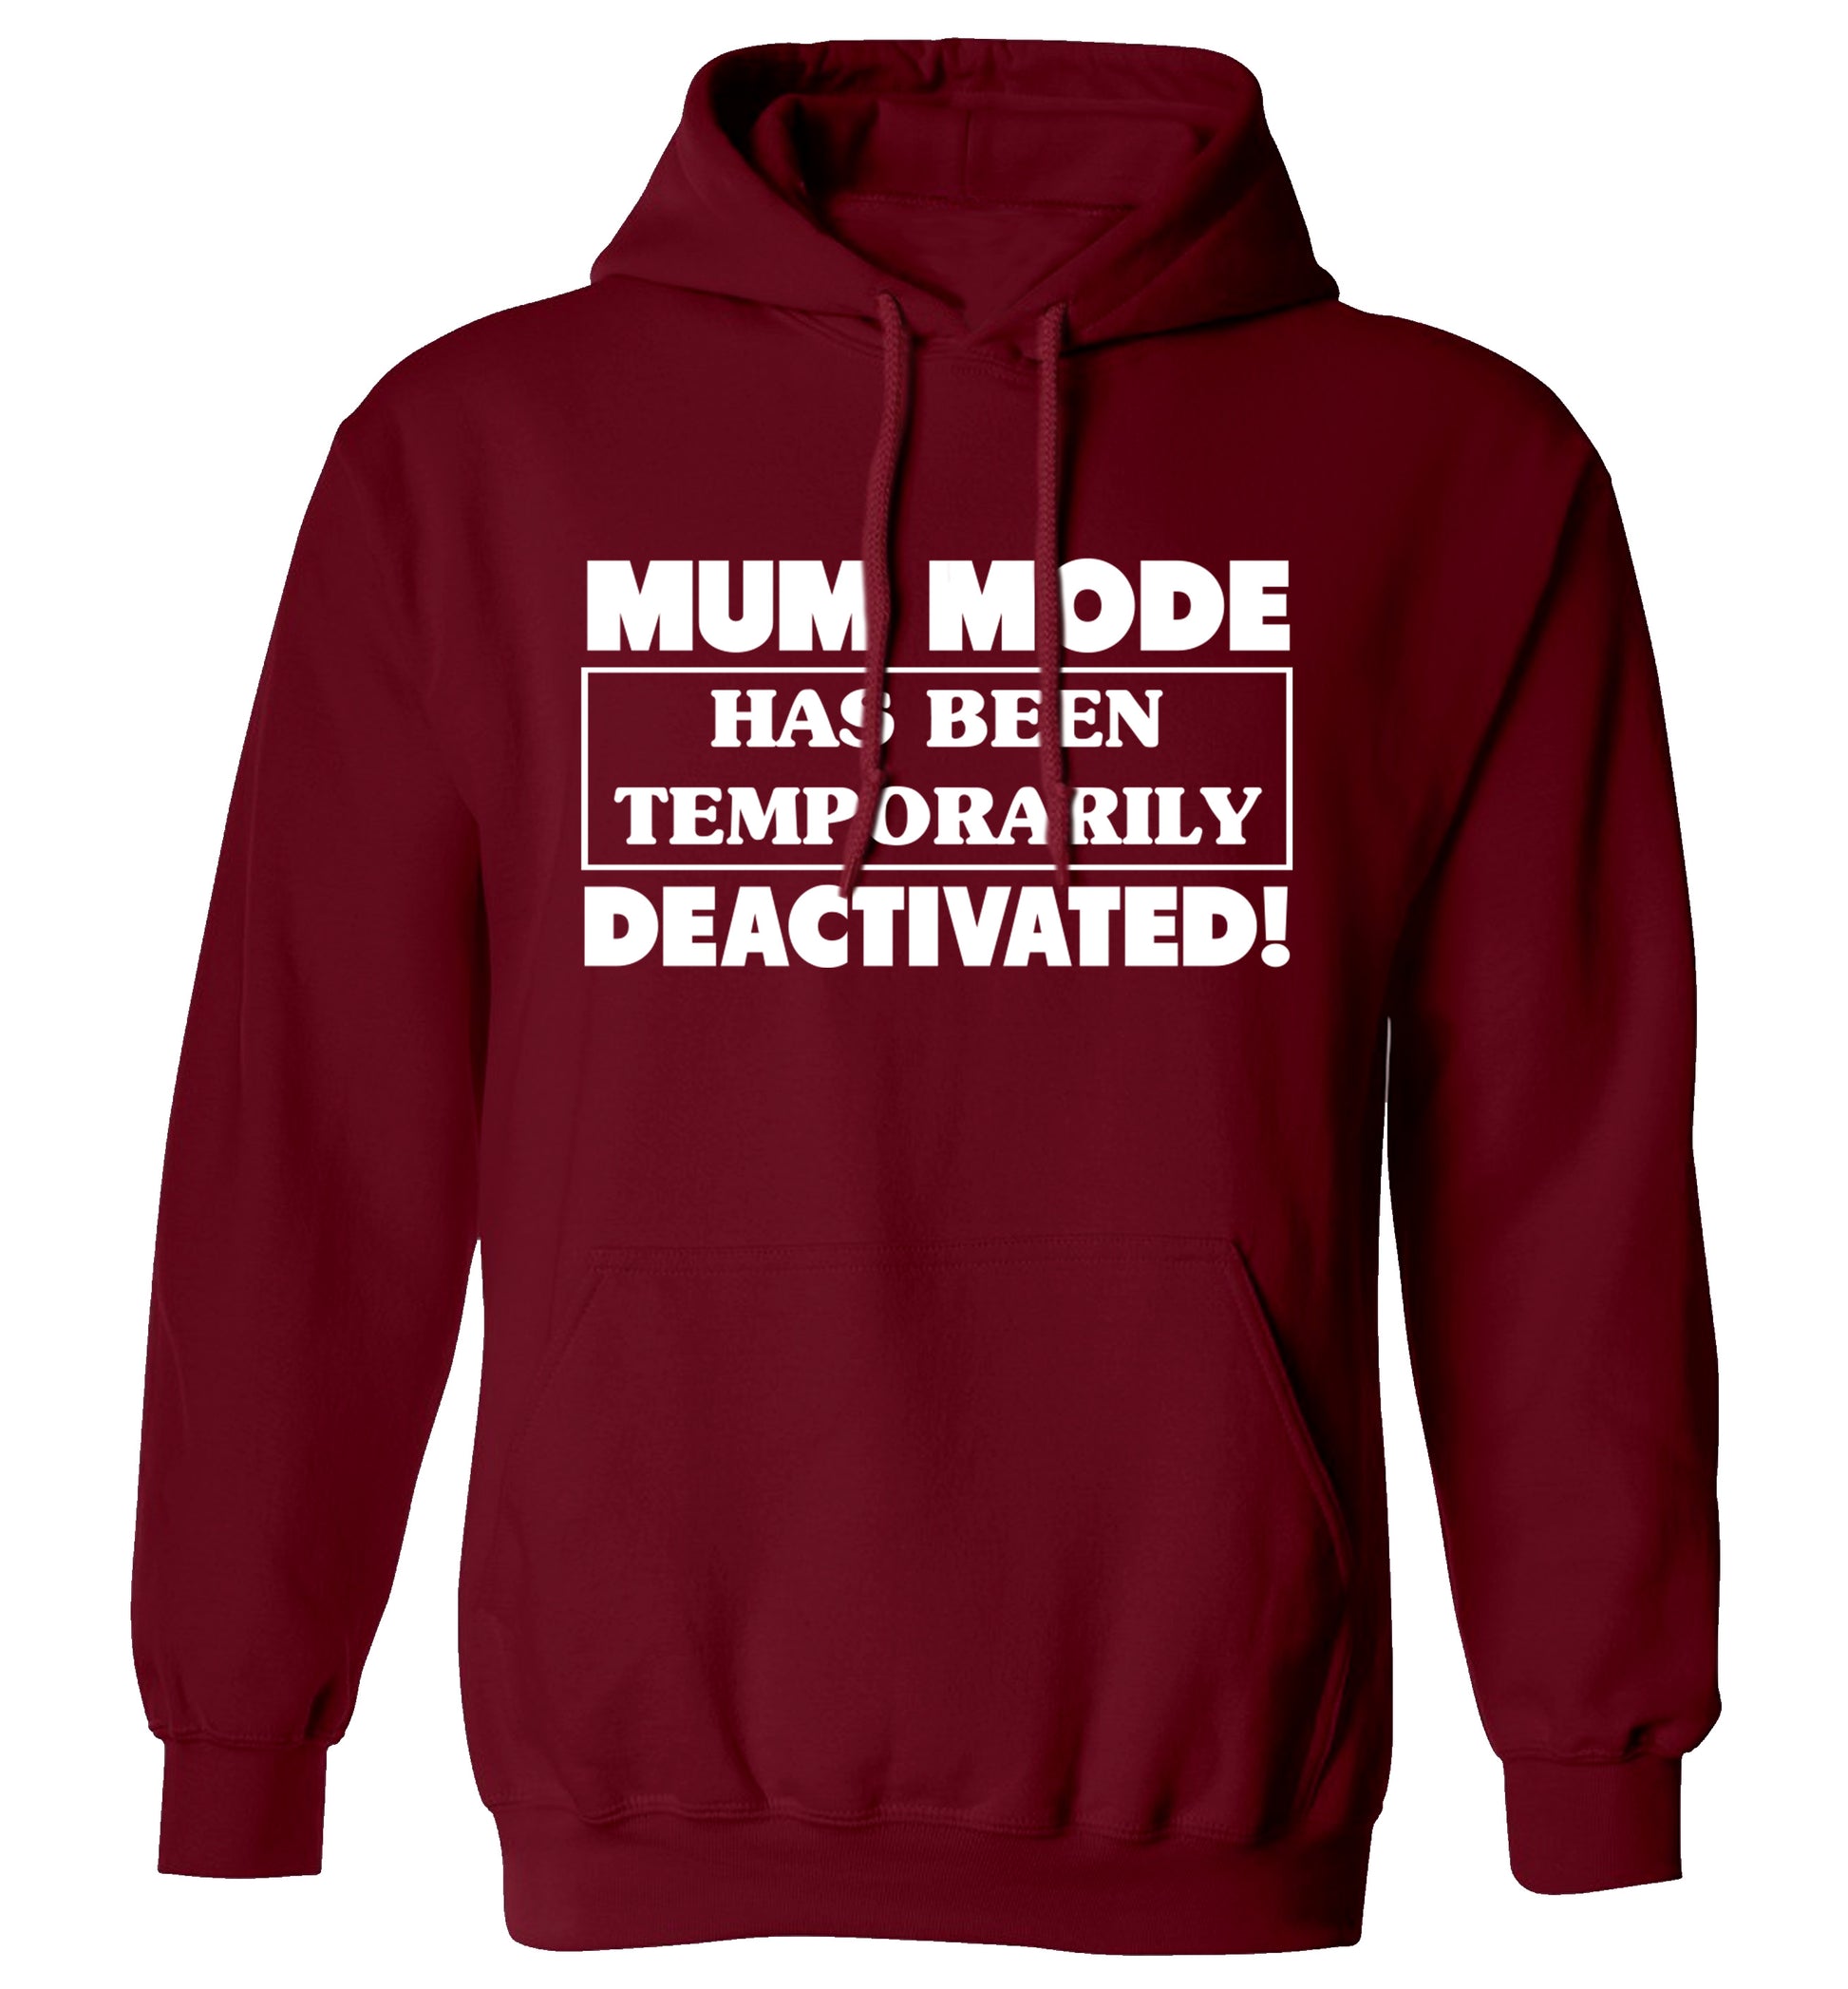 Mum mode has been temporarily deactivated! adults unisex maroon hoodie 2XL